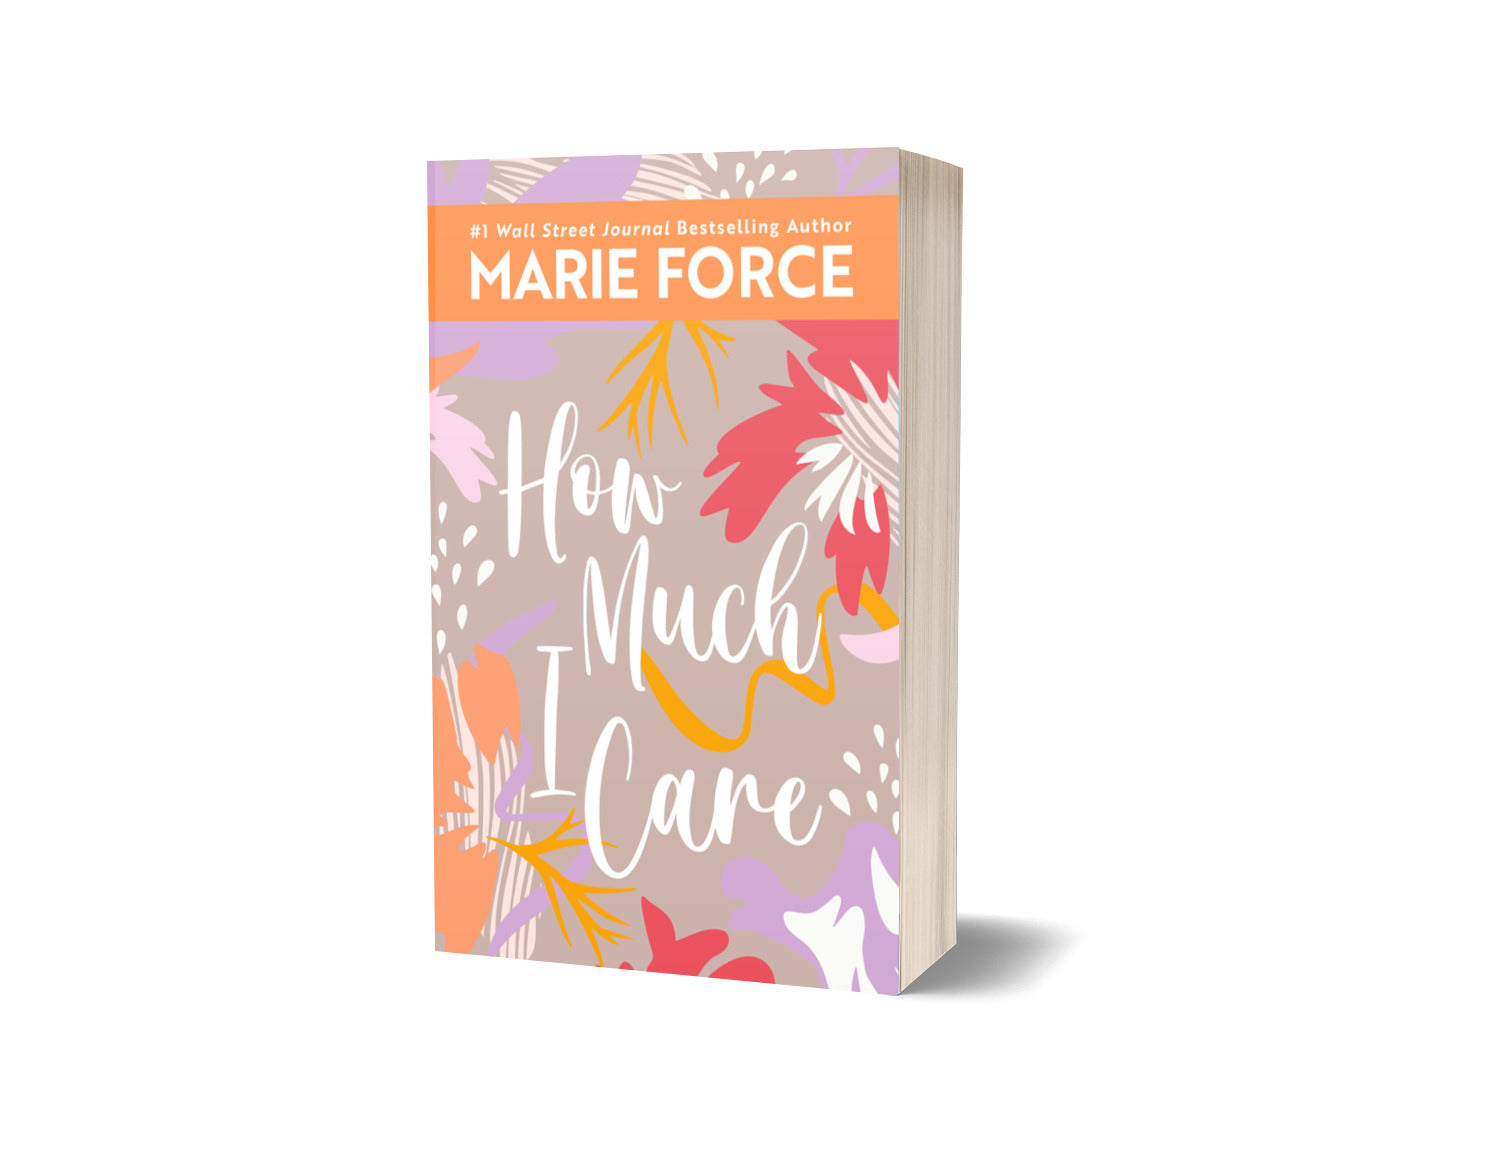 How Much I Care, Miami Nights Series, Book 2 (NEW COVER)